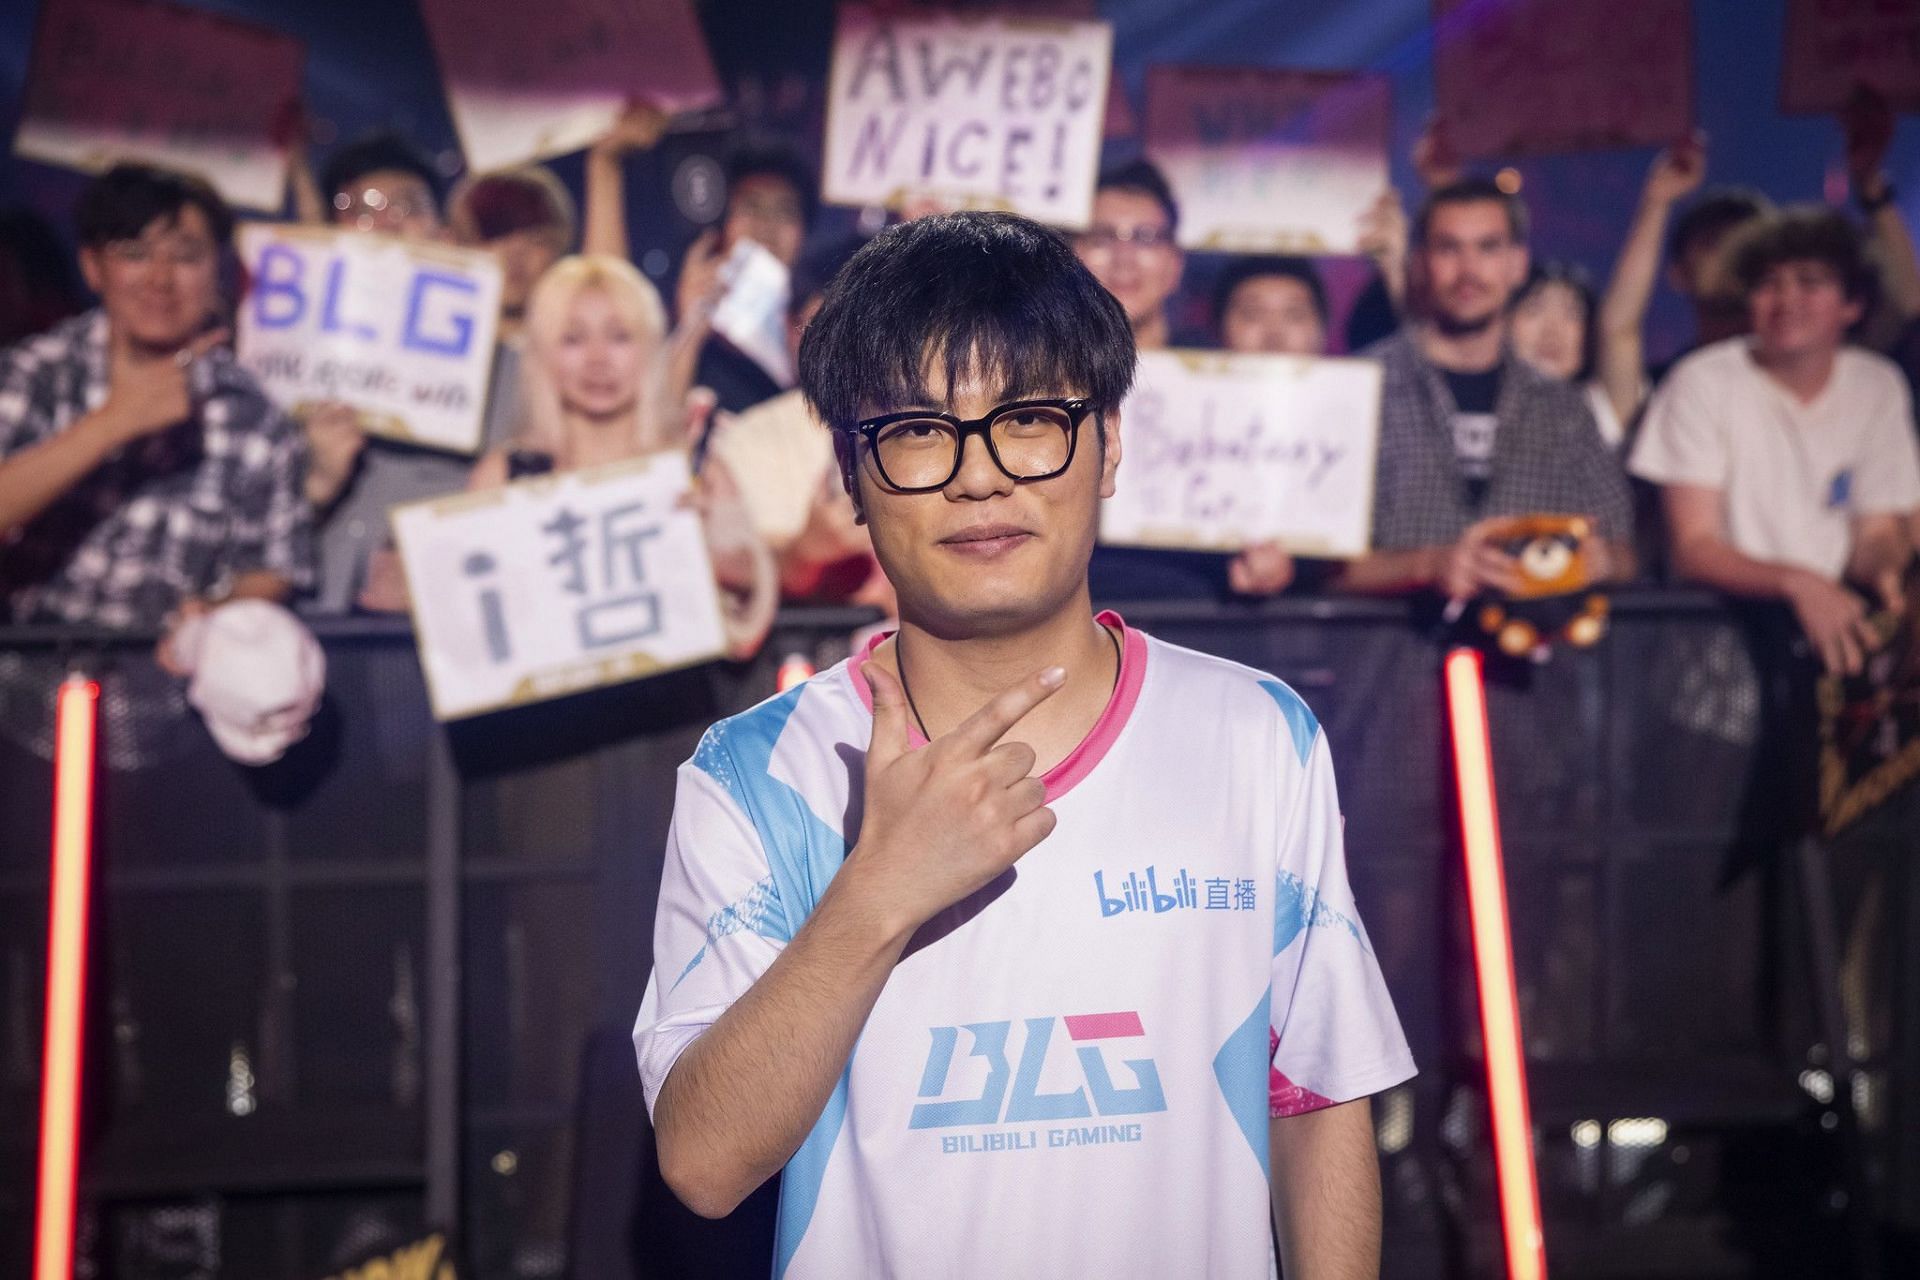 whzy at Champions 2023 (Image via Riot Games and flickr)